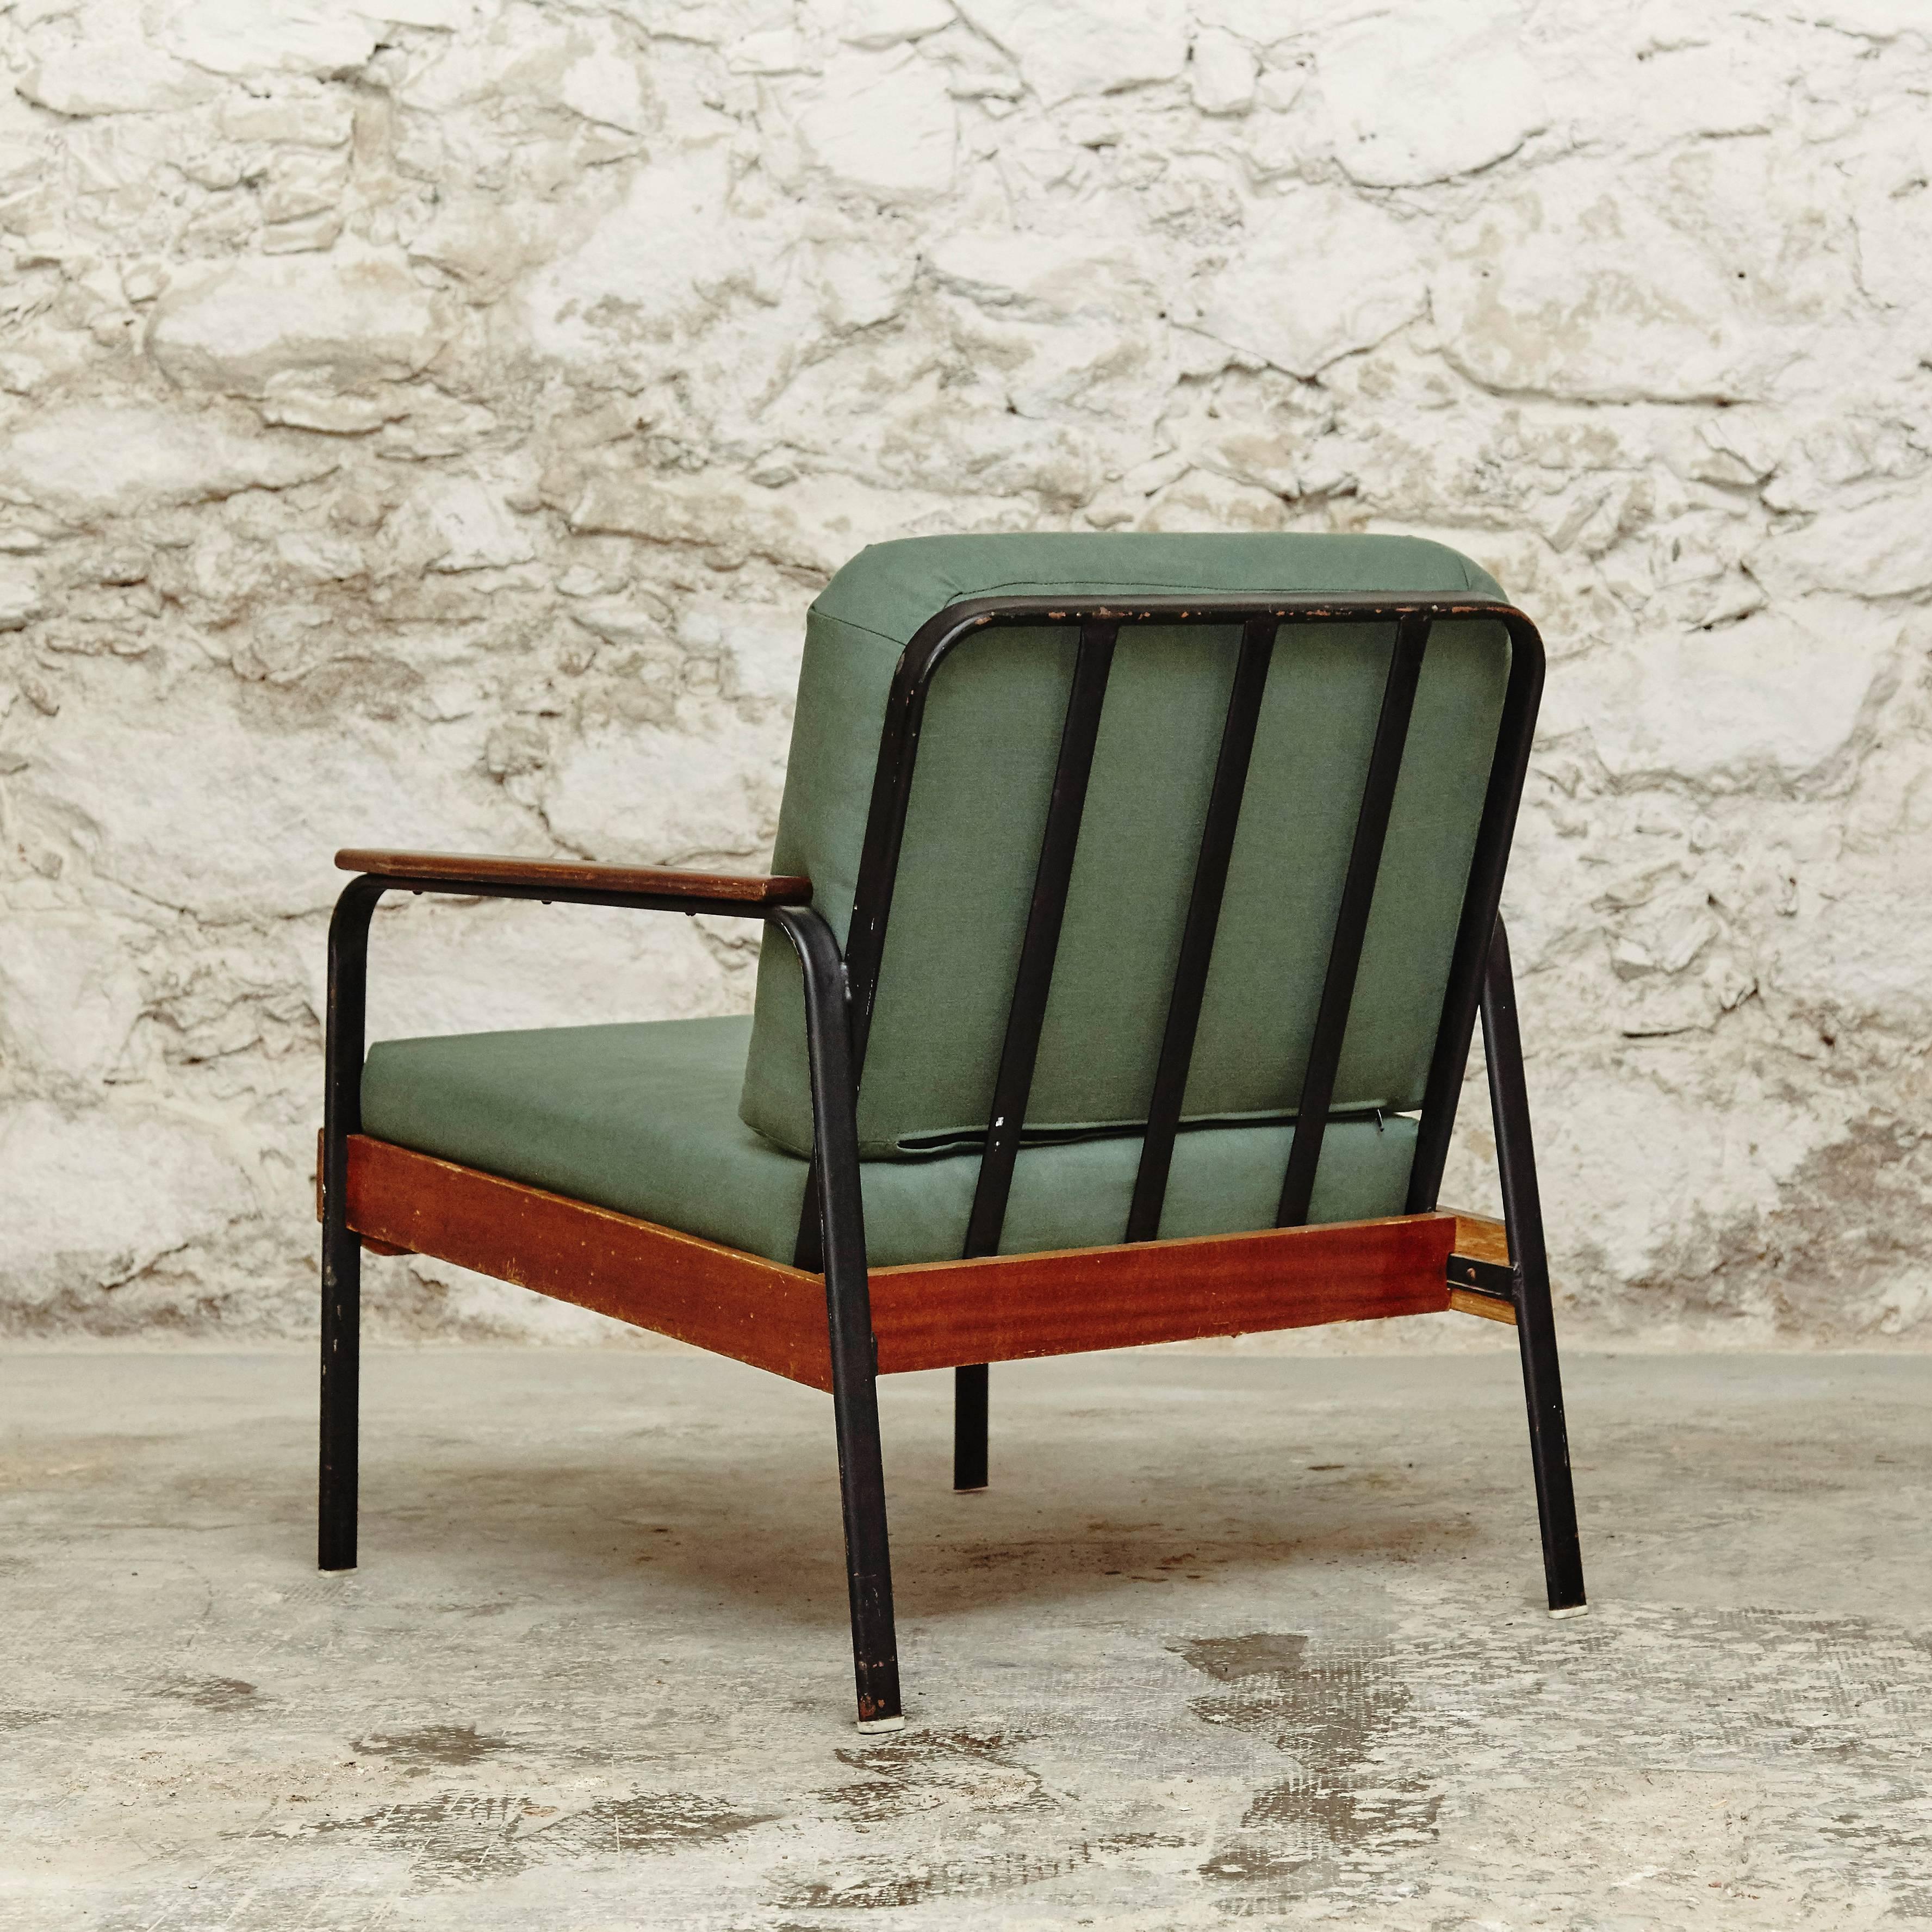 Metal Pair of French Easy Chair After Jean Prouve, circa 1950